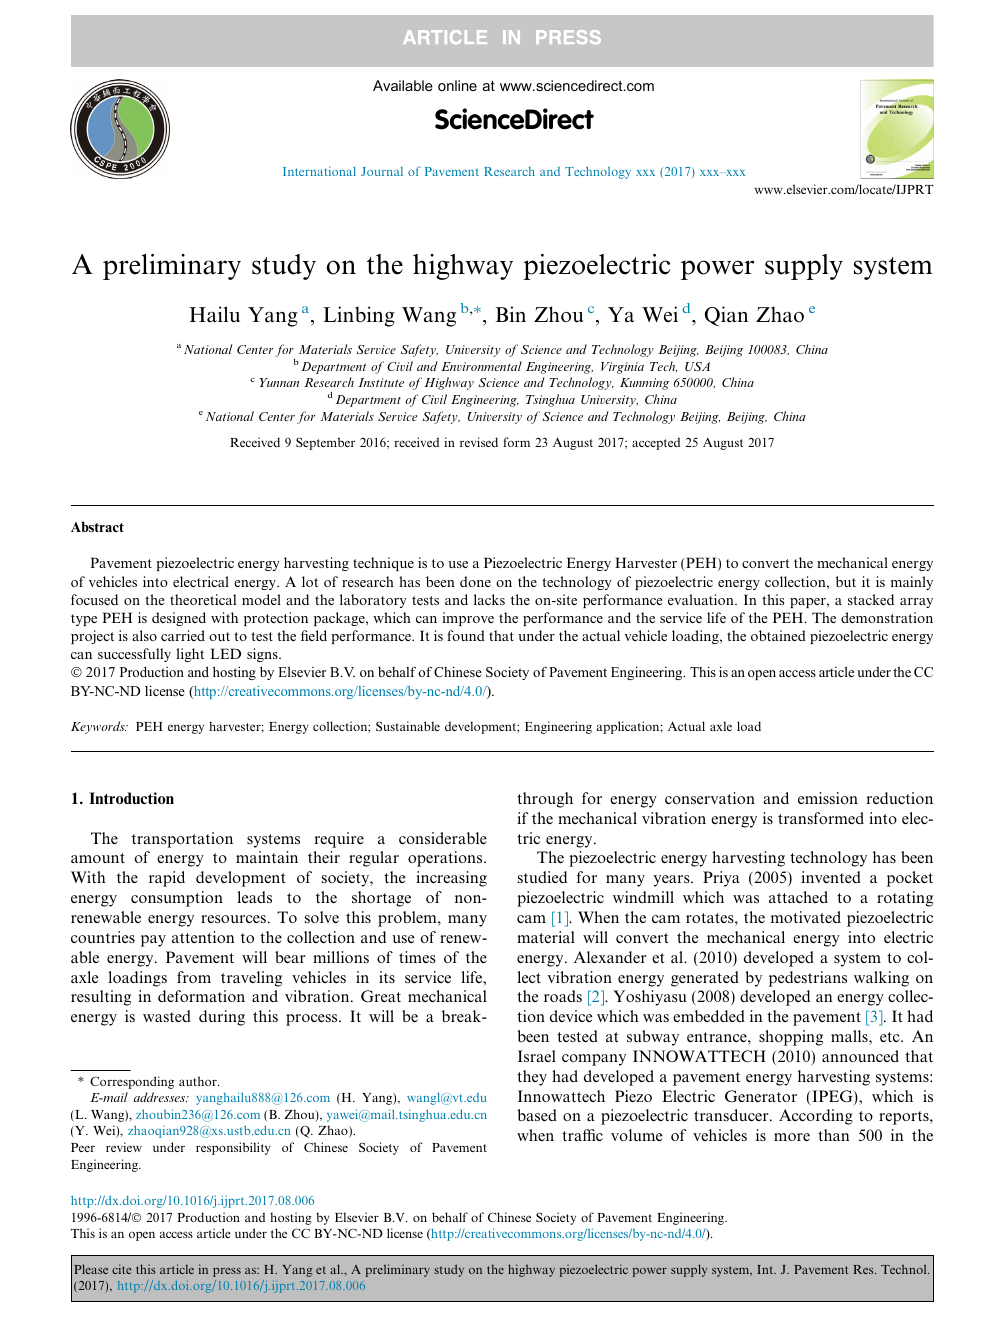 A Preliminary Study On The Highway Piezoelectric Power Supply System Topic Of Research Paper In Materials Engineering Download Scholarly Article Pdf And Read For Free On Cyberleninka Open Science Hub